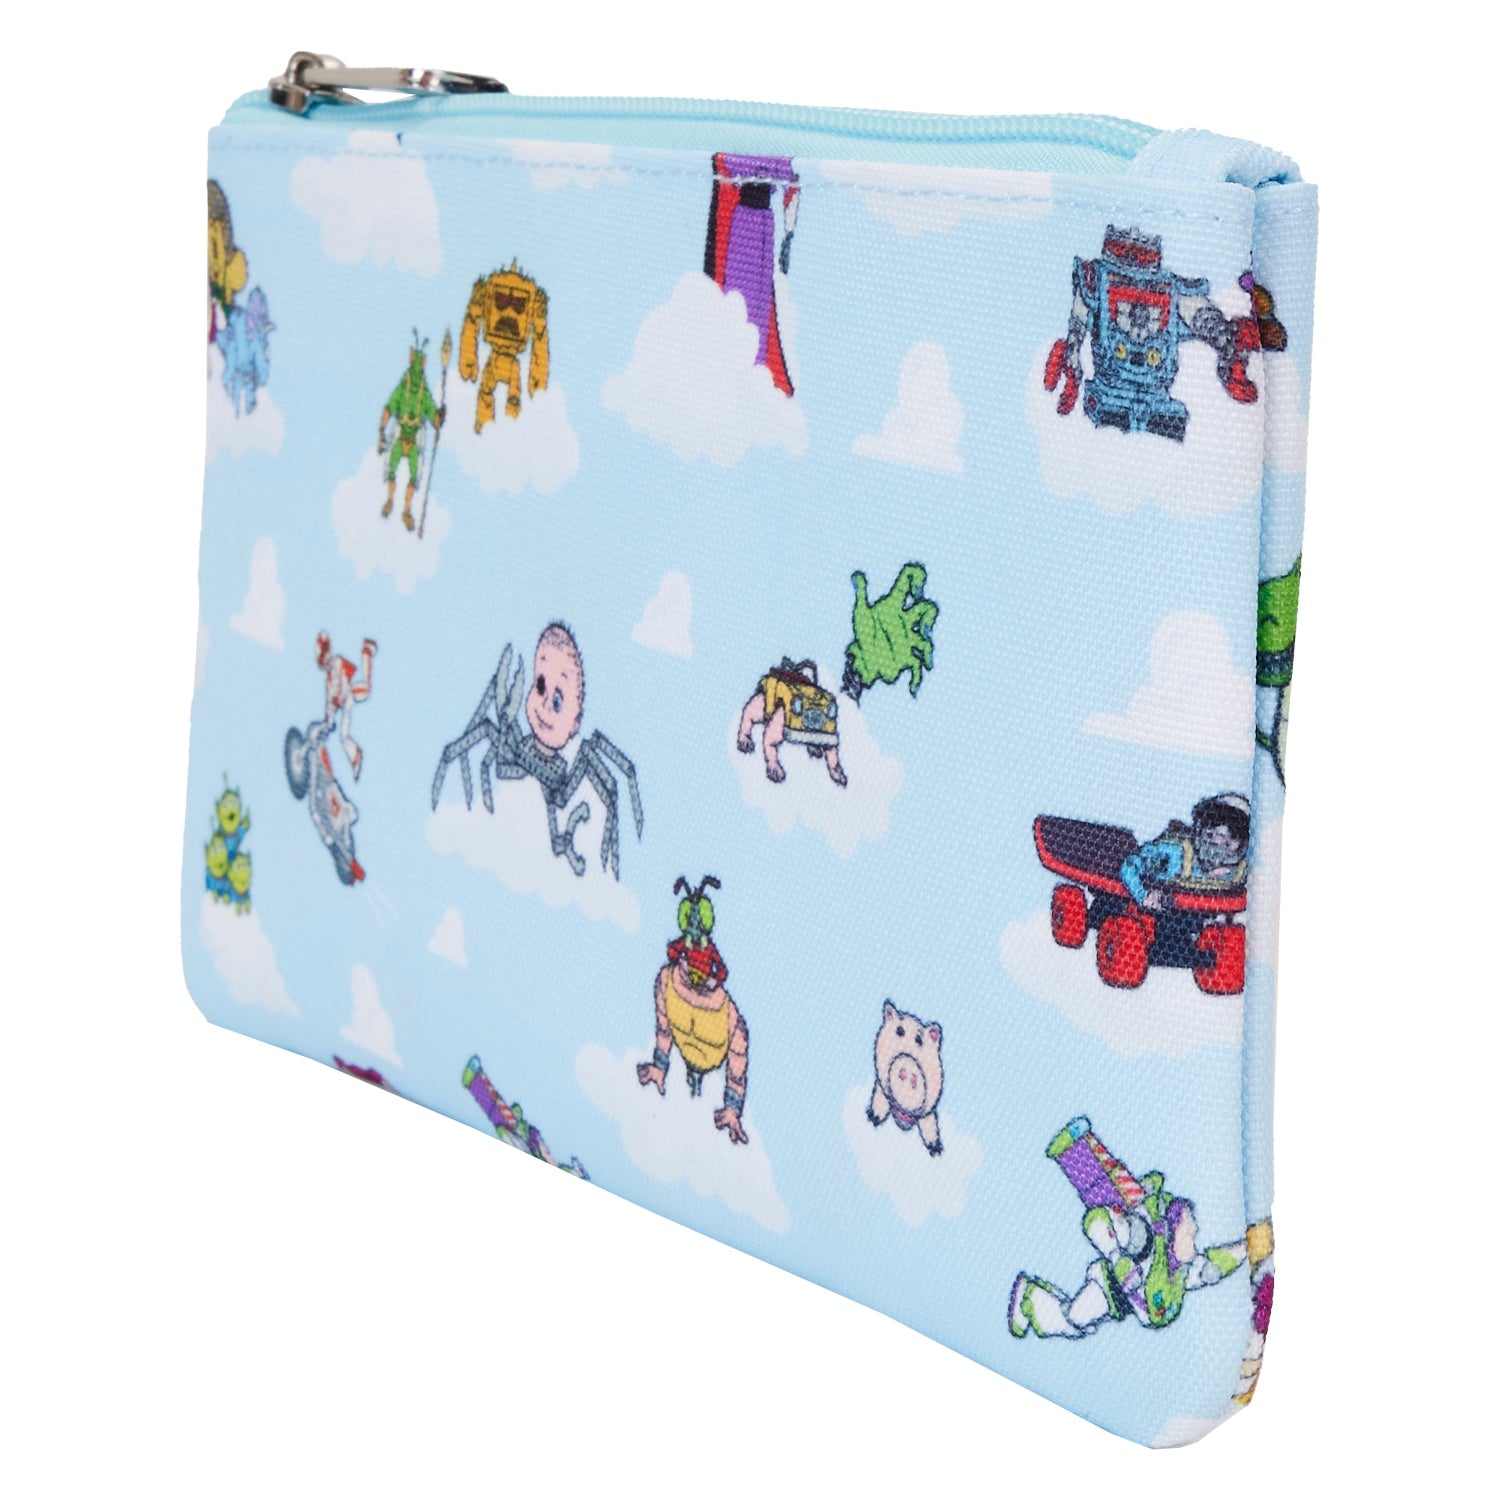 Loungefly x Disney Pixar Toy Story Movie Collab AOP Wristlet Wallet - GeekCore